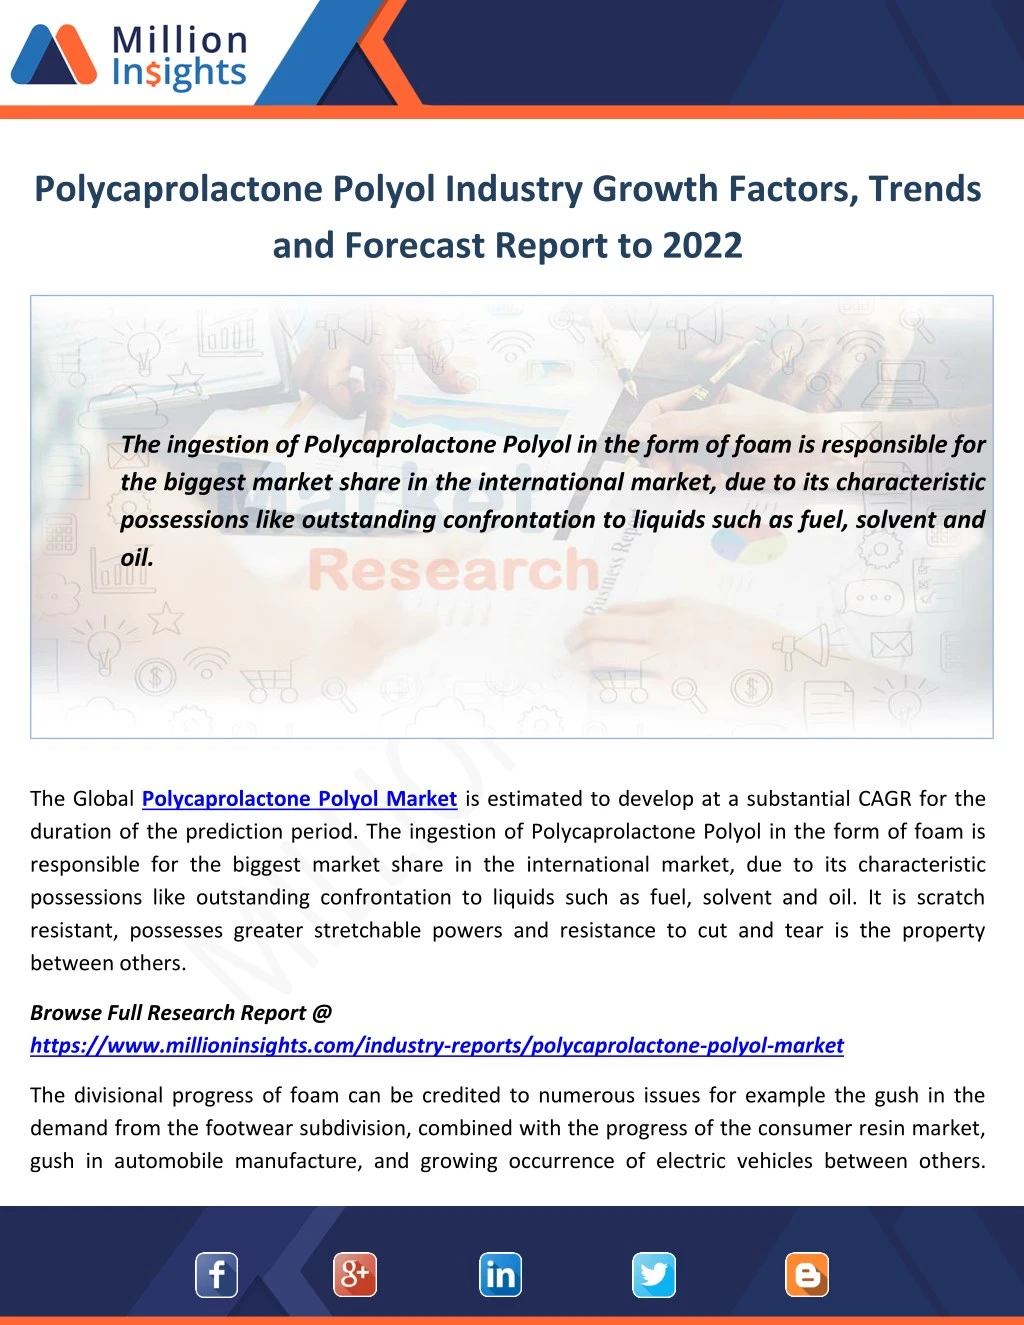 polycaprolactone polyol industry growth factors